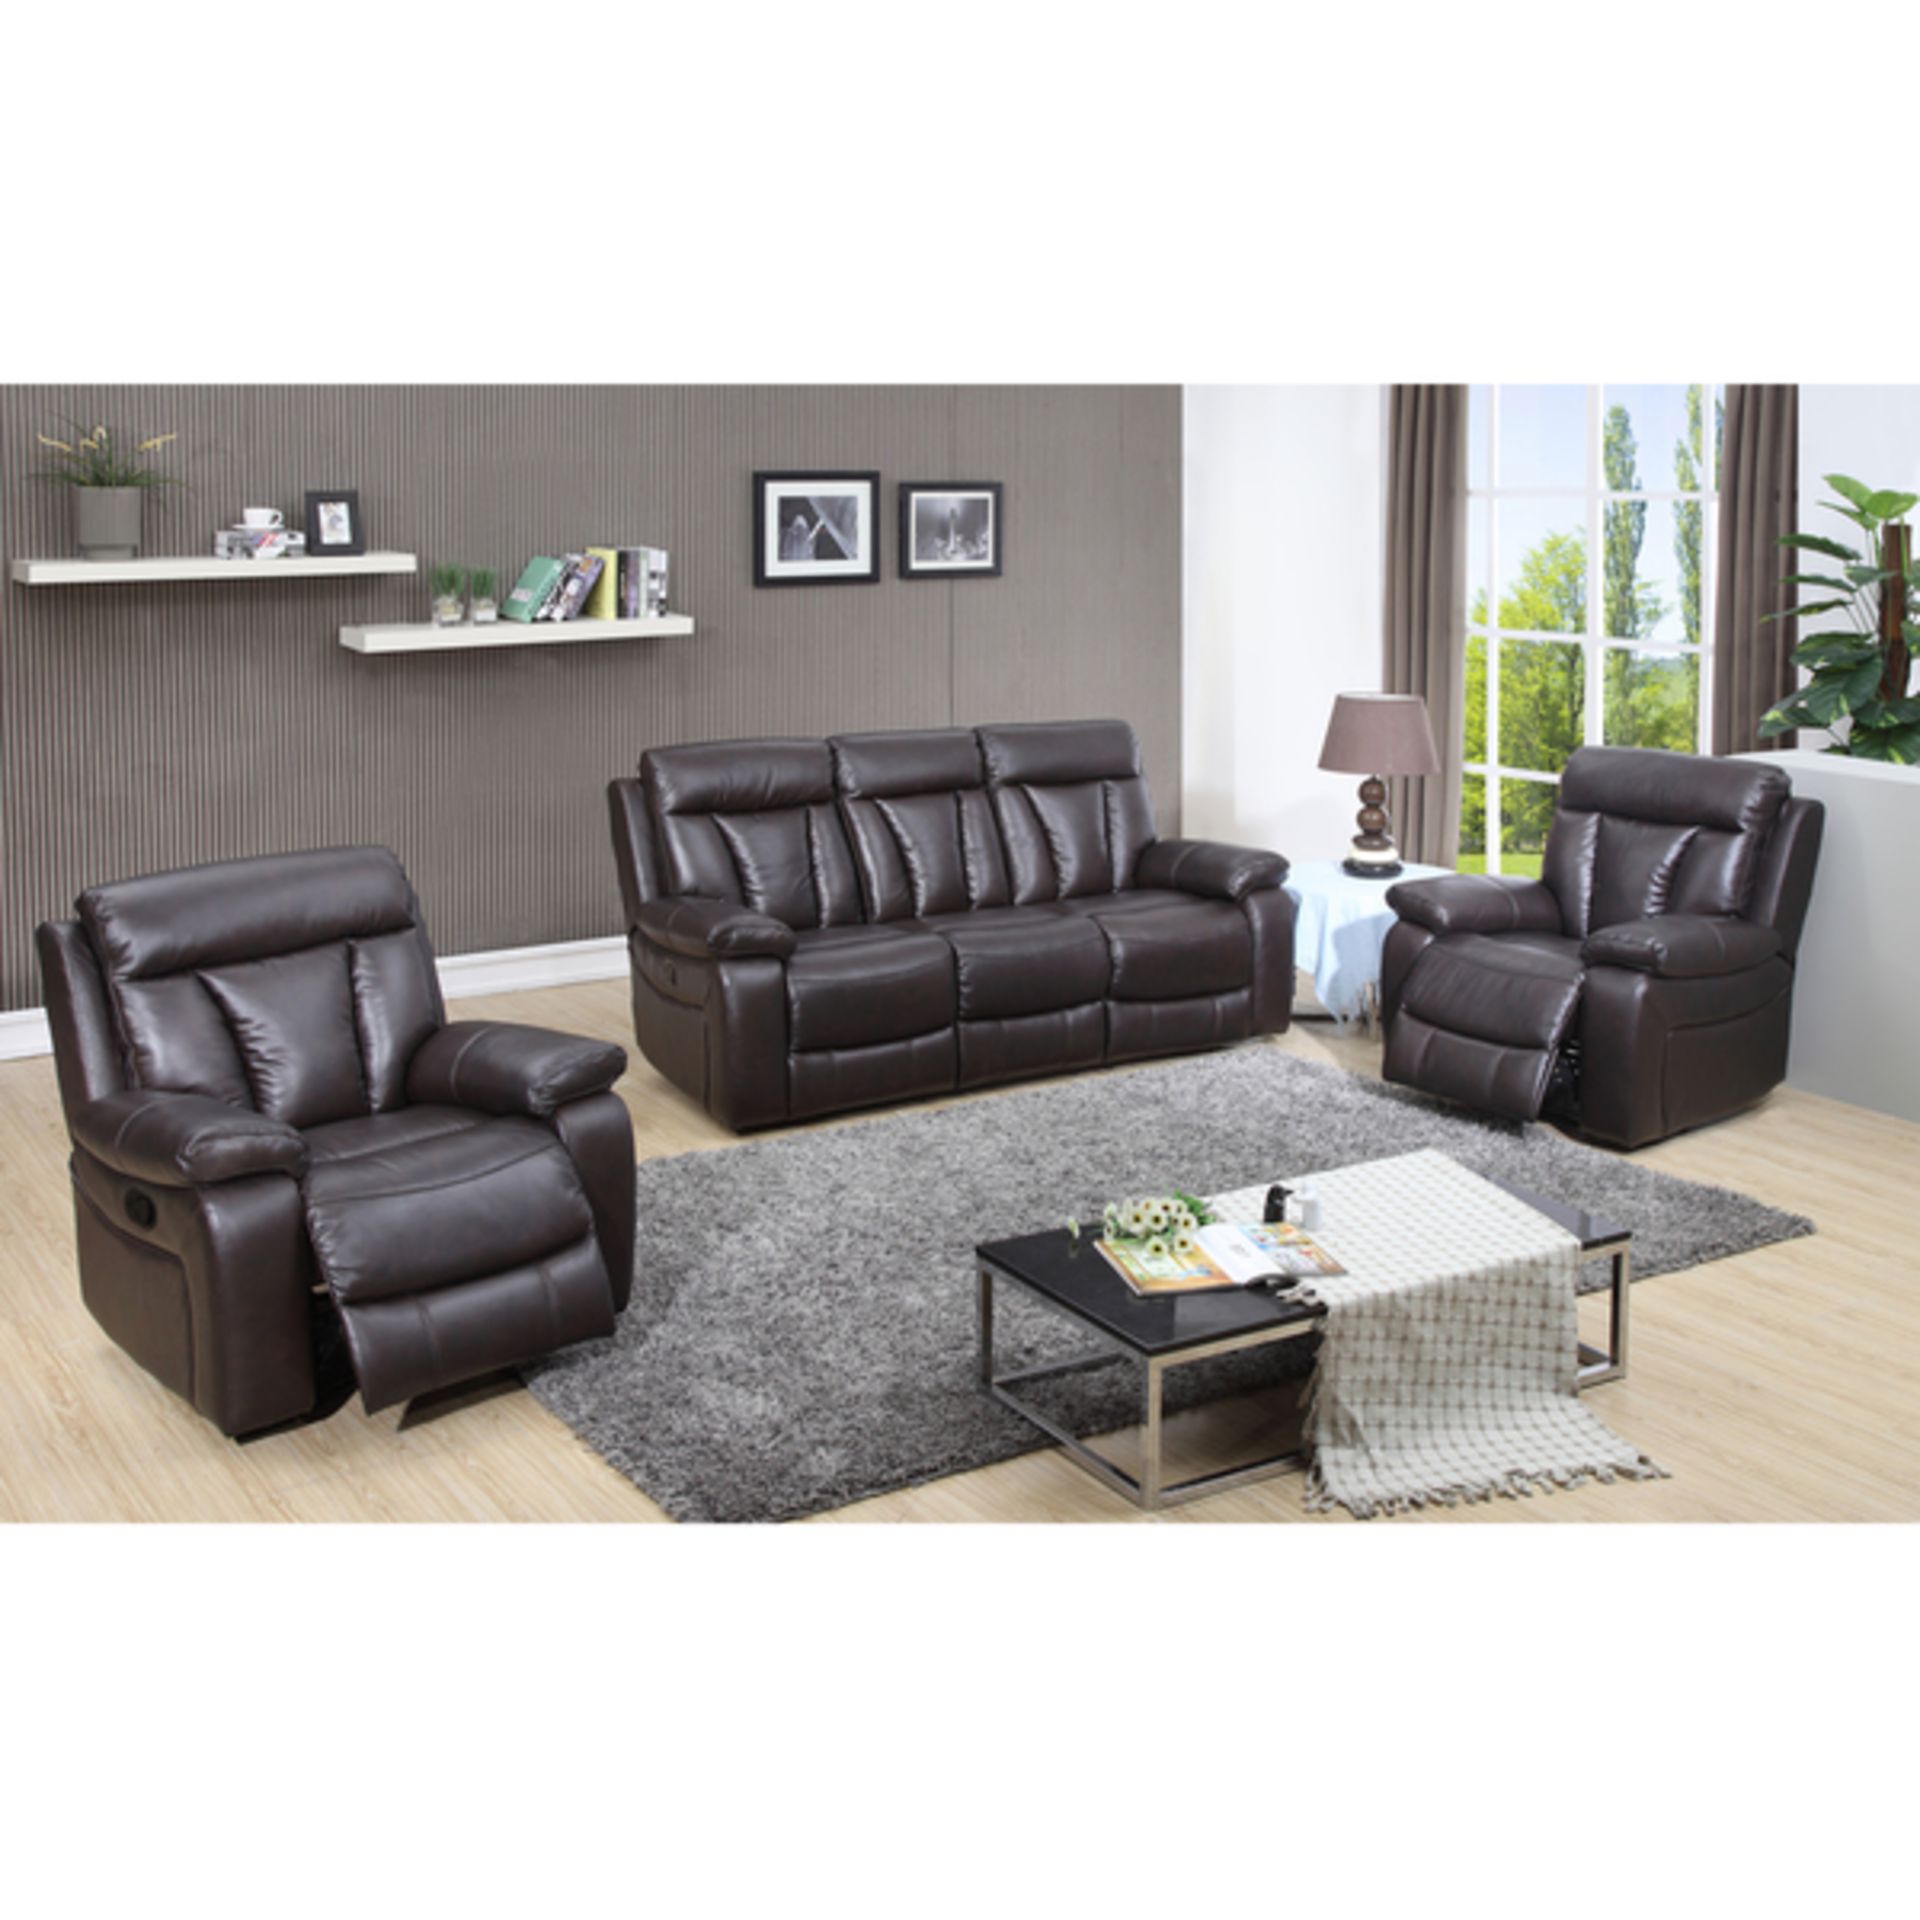 Brand new direct from the manufacturers Bermuda 3 seater plus 2 seater laredo fabric reclining